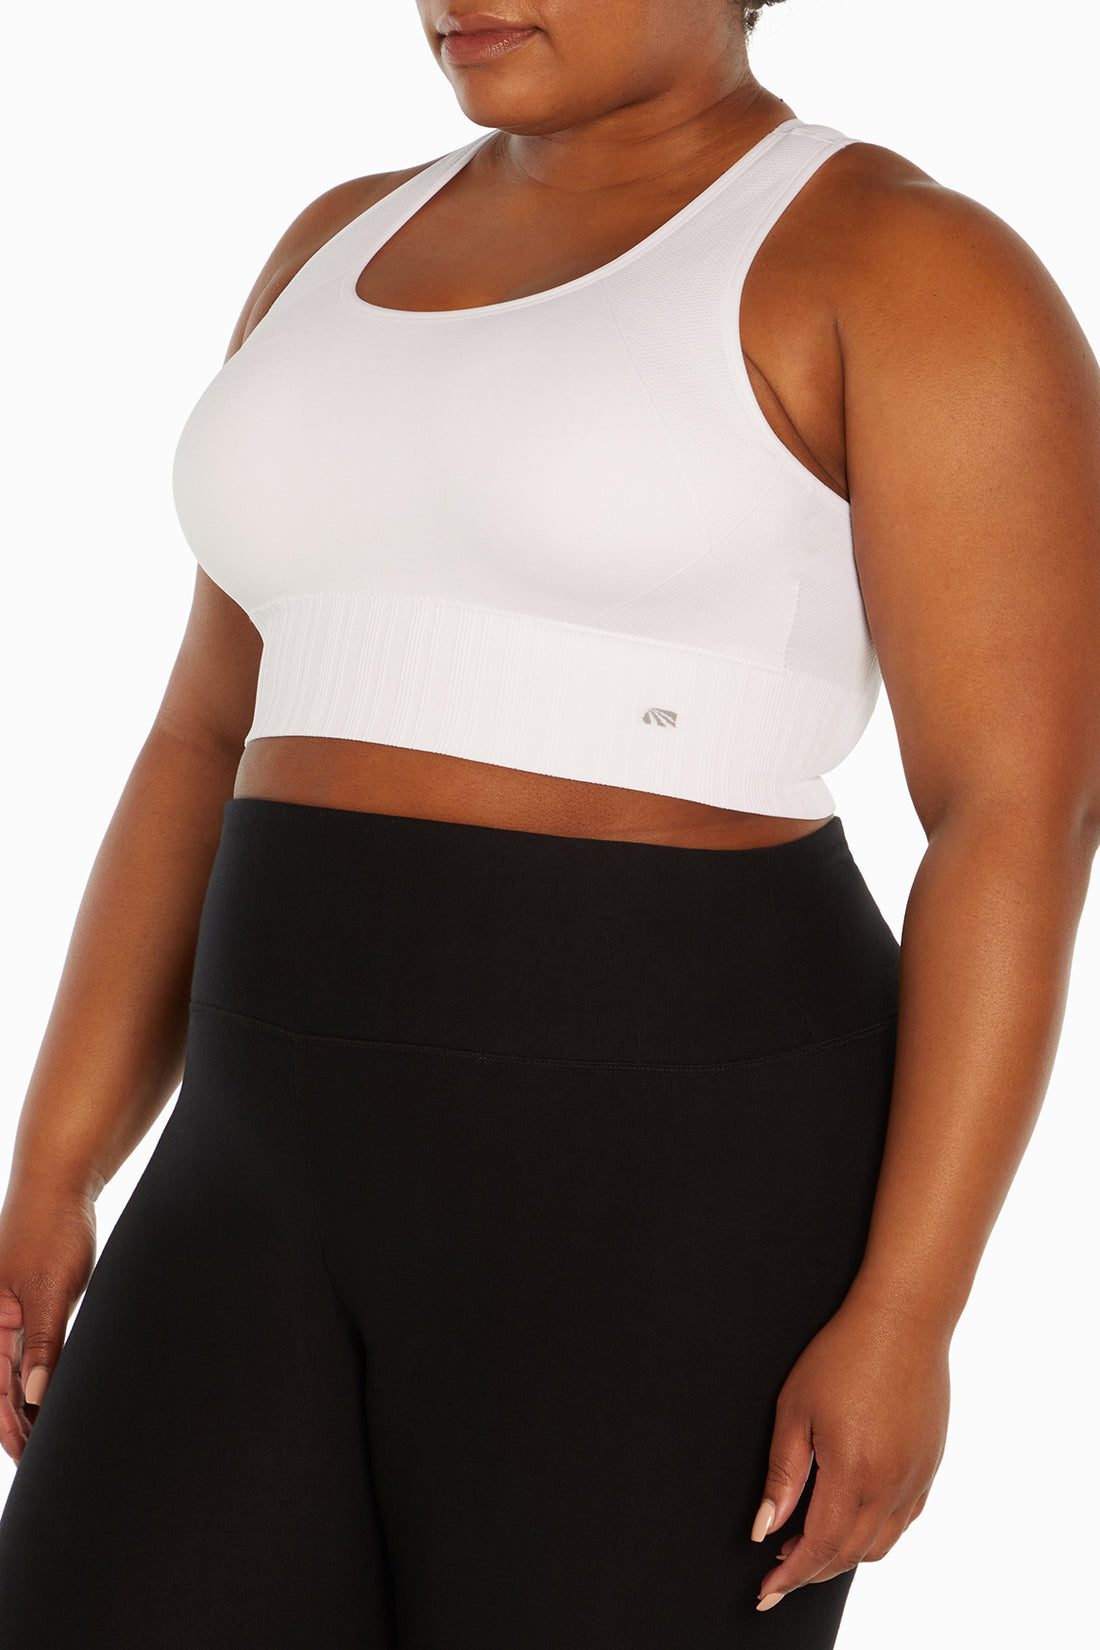 17 of the Best Plus Size Workout Clothes